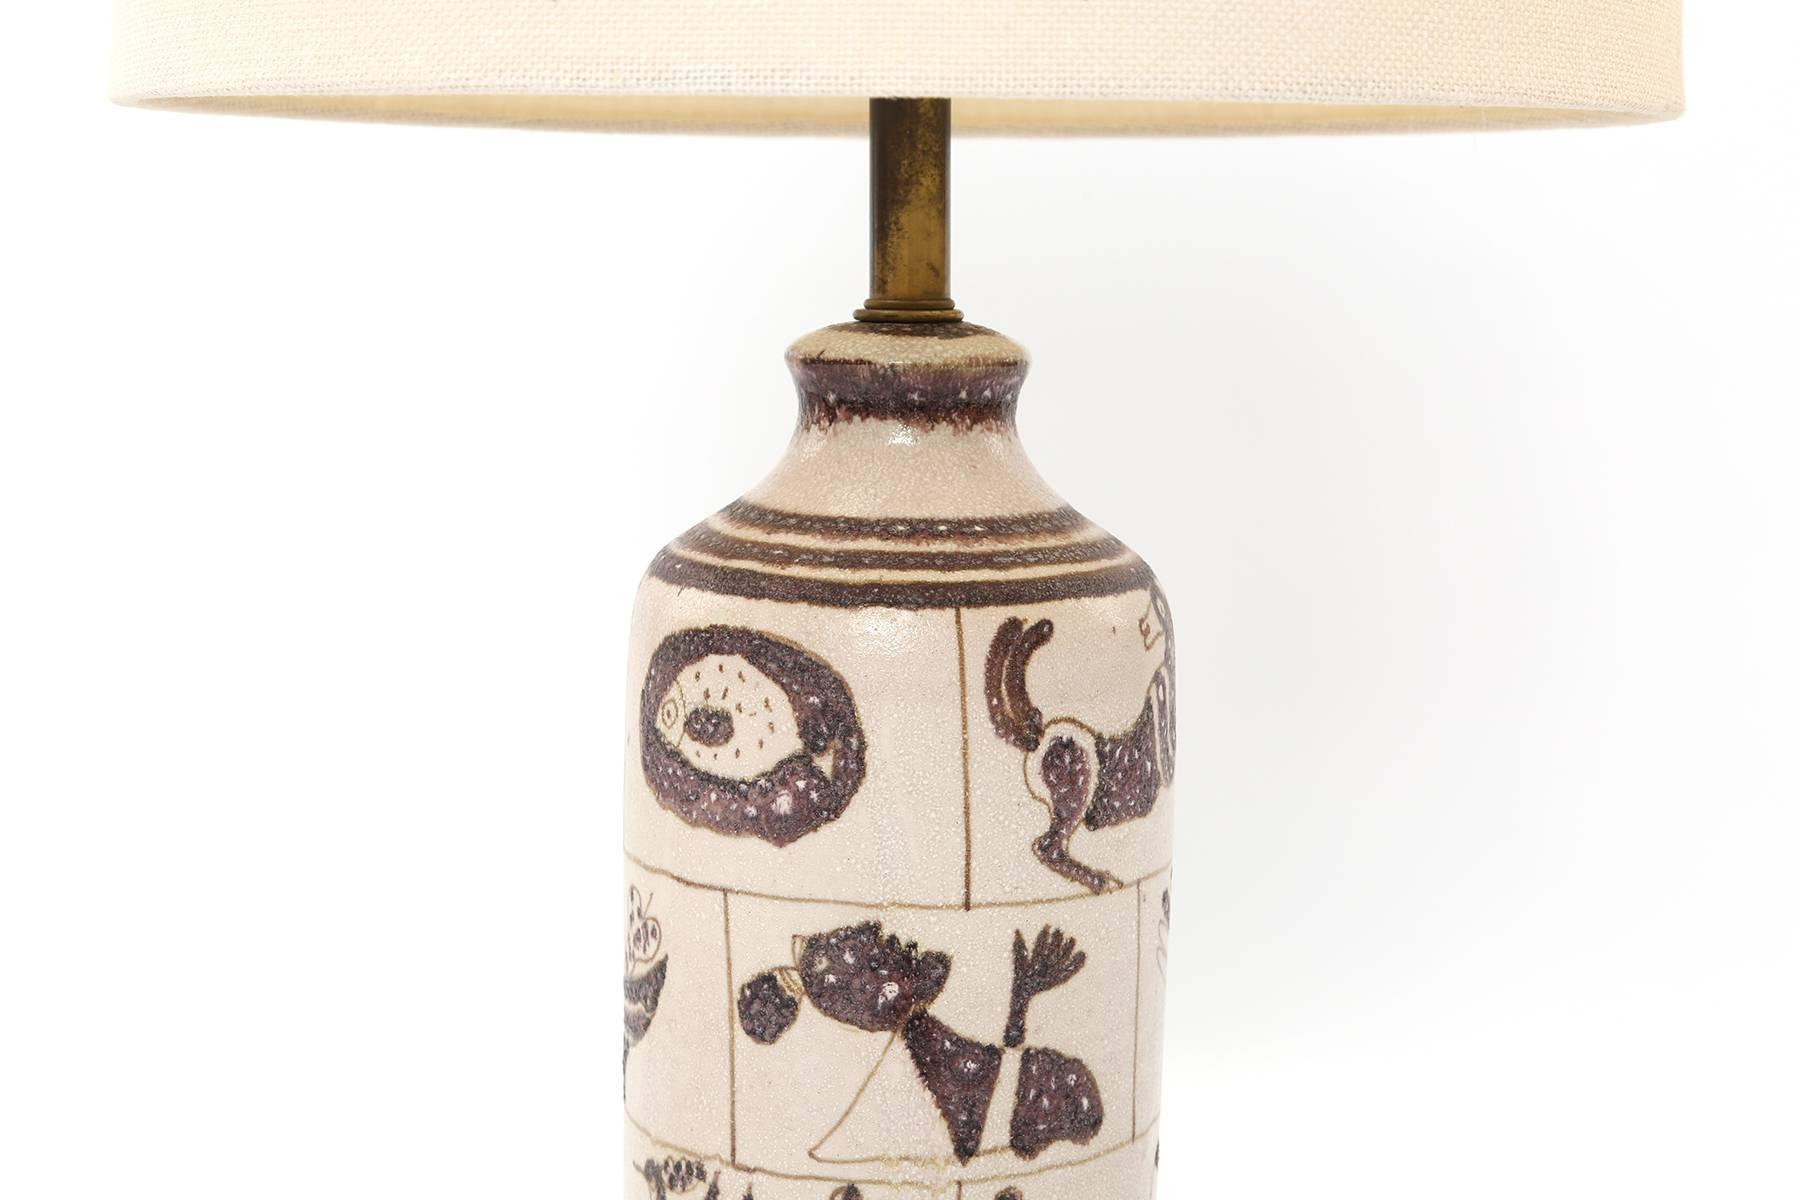 Guido Gambone for Marbro ceramic table lamp, circa early 1950s. This fabulous example has a textural glaze with figural and animal motifs. Sits atop a newly finished solid walnut base. Newly wired. Price includes shade pictured.